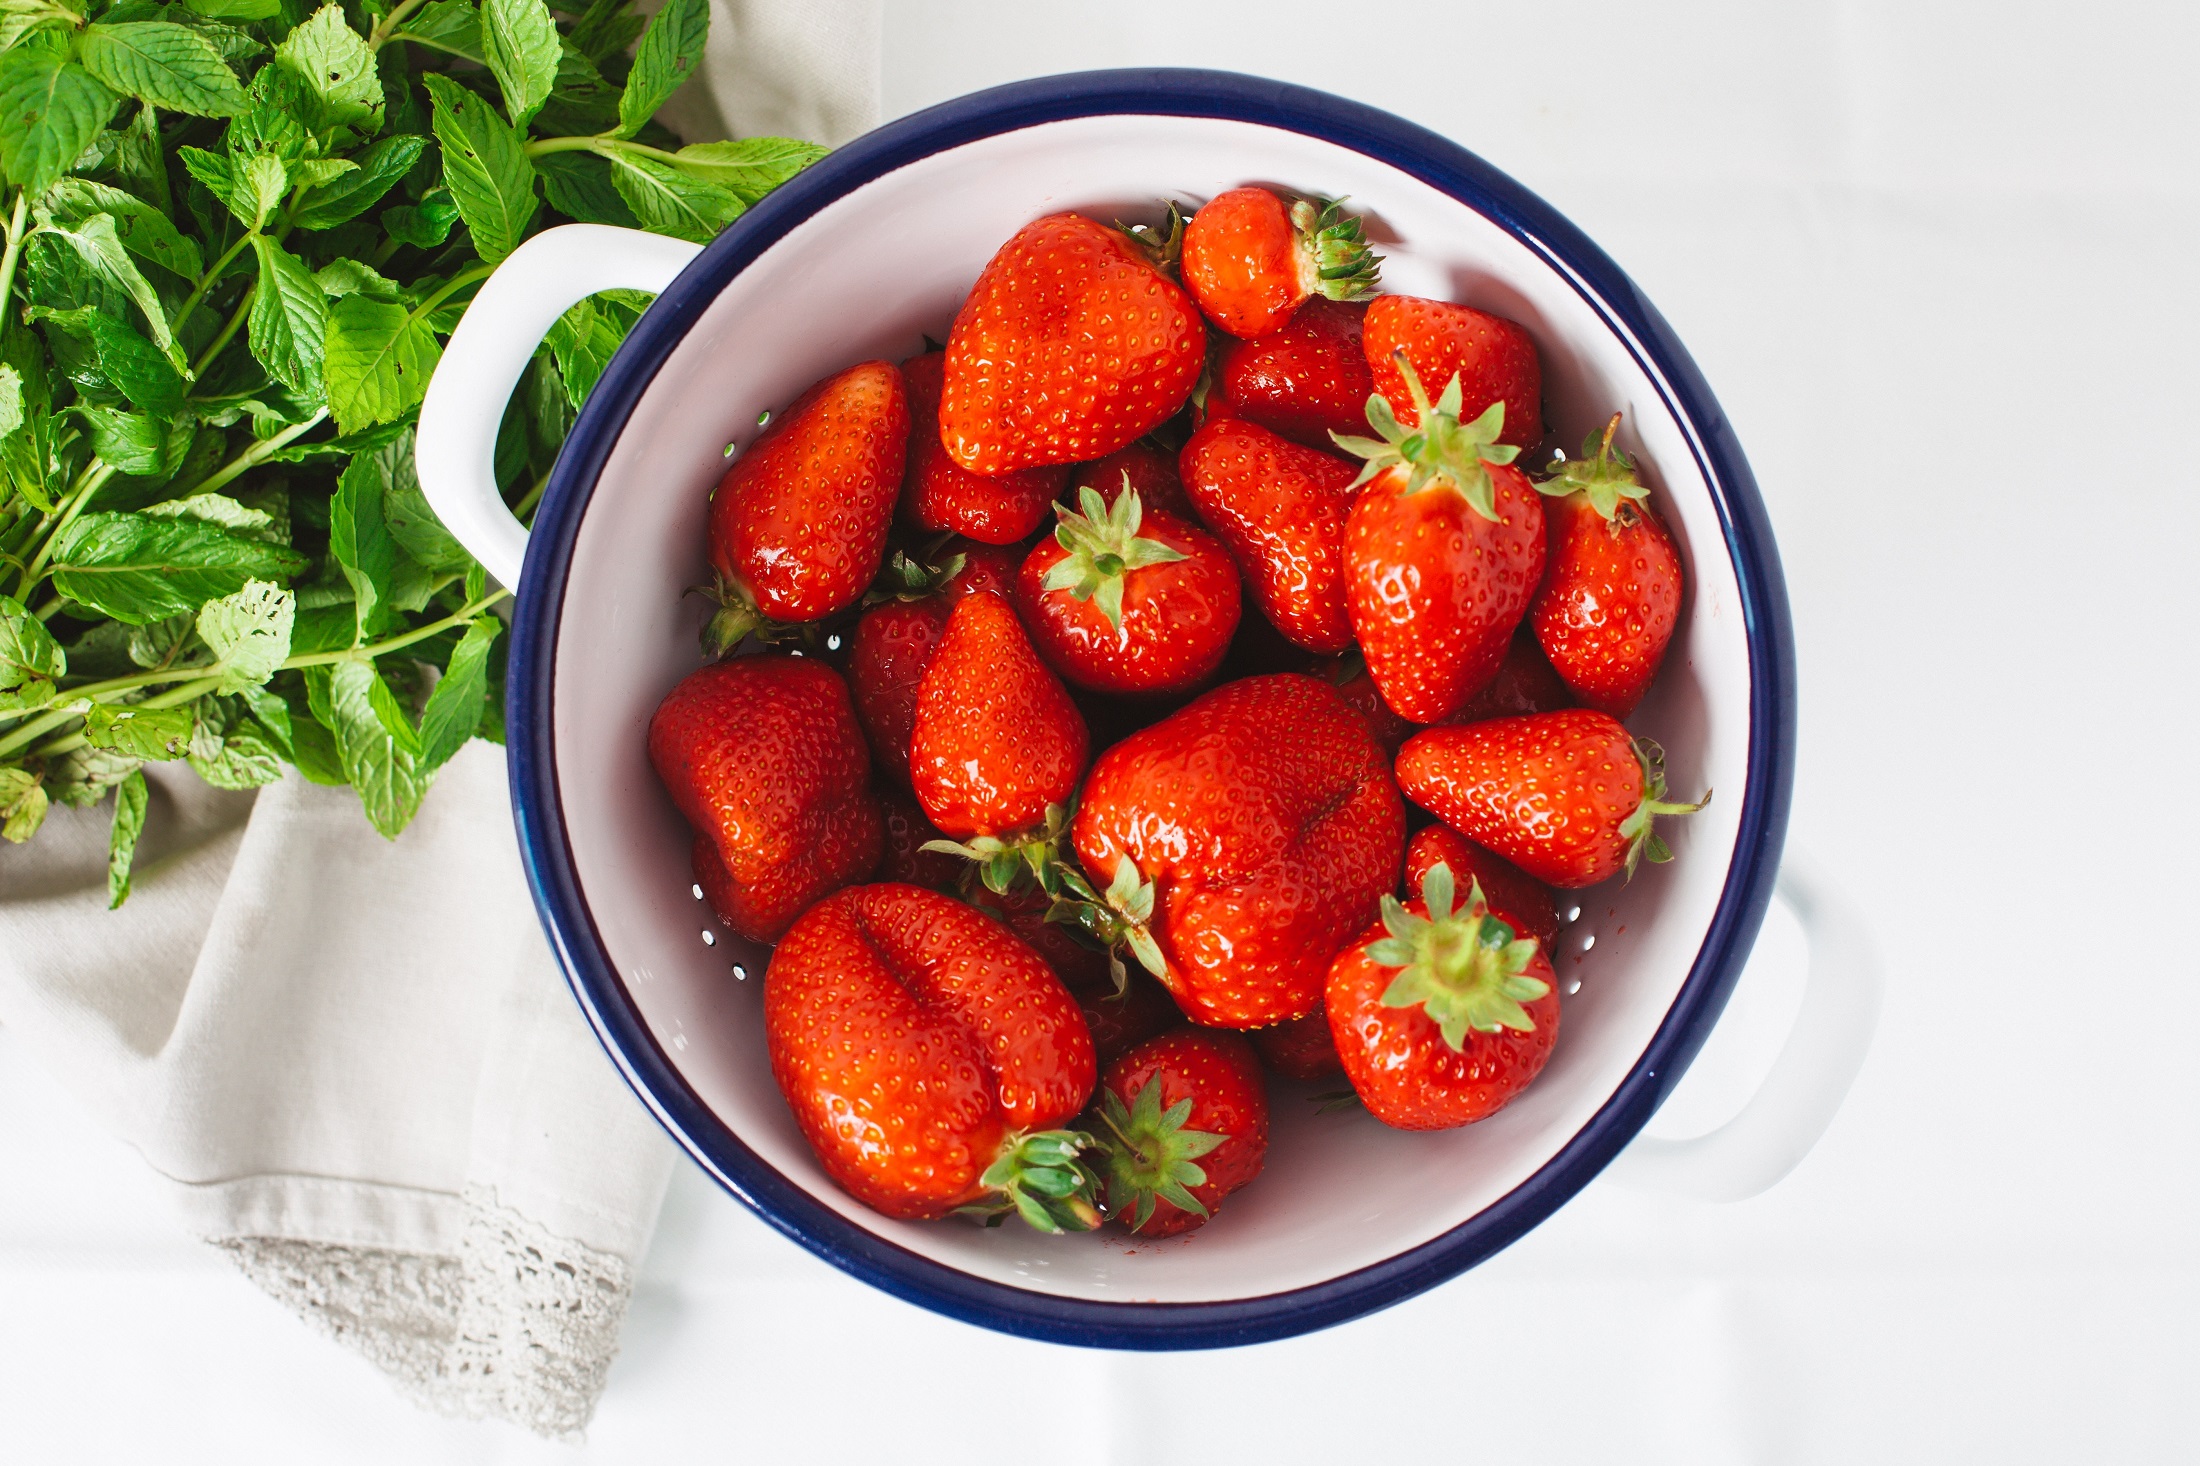 Strawberries for beauty. We suggest how to create great cosmetics on their basis